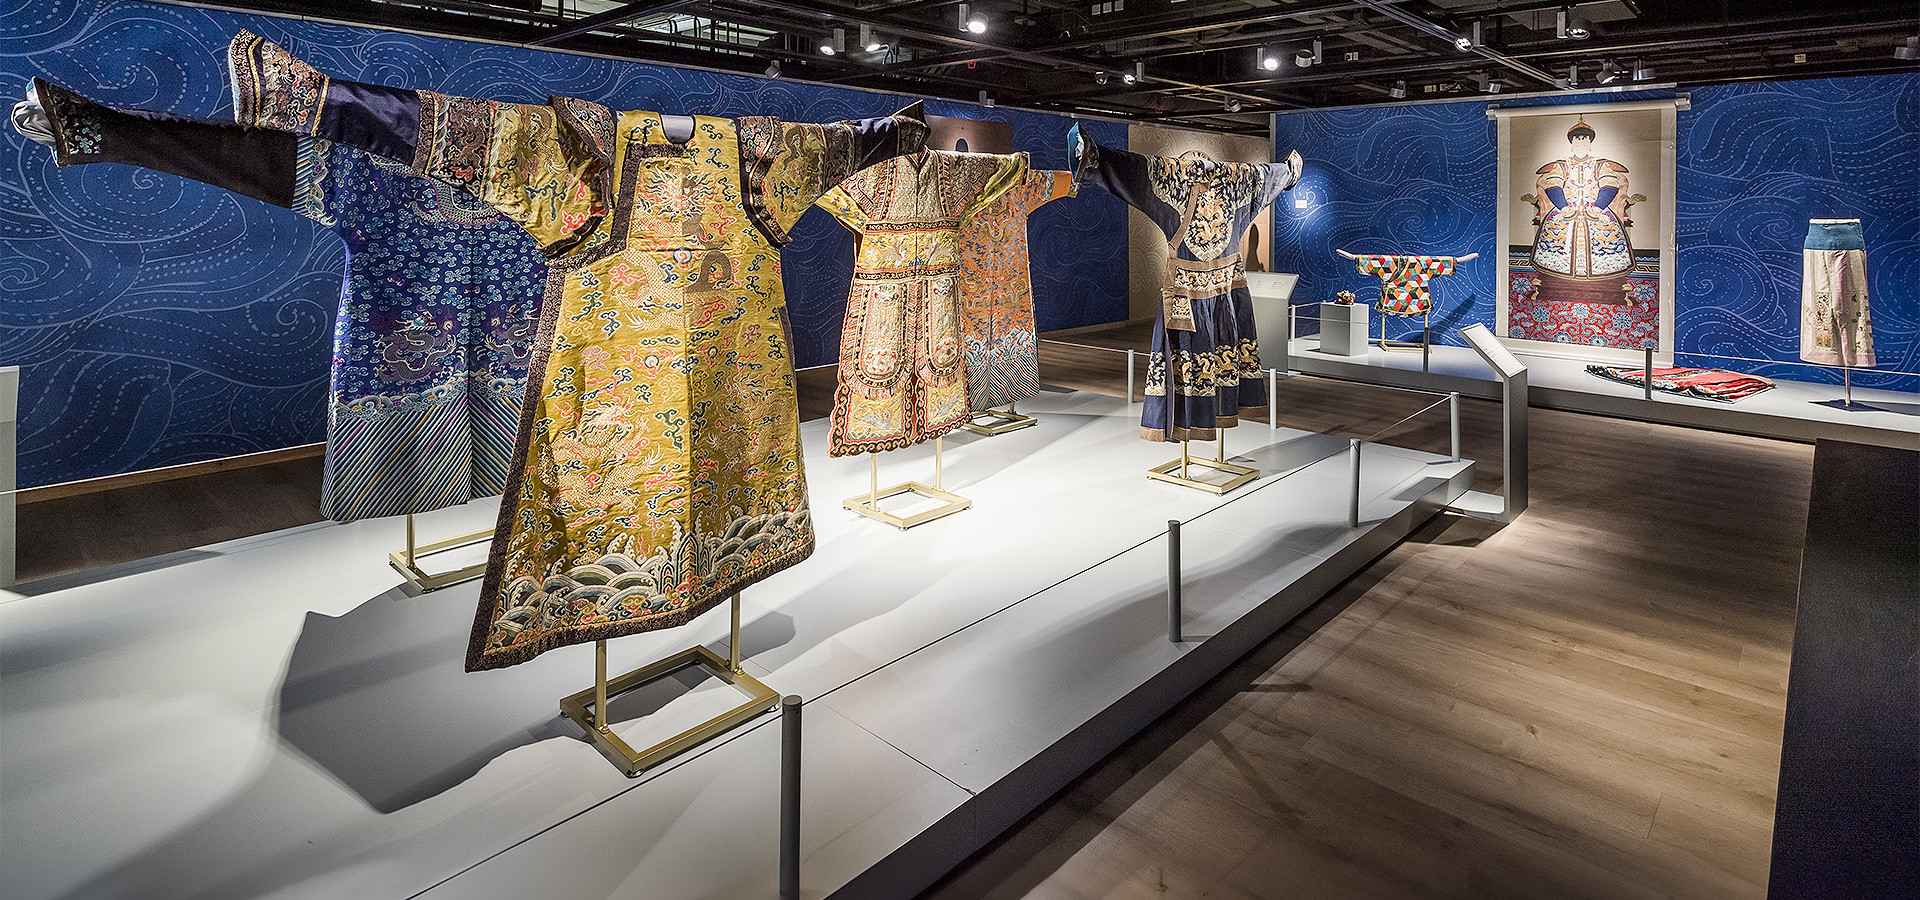 A Passion for Silk: The Road from China to Europe